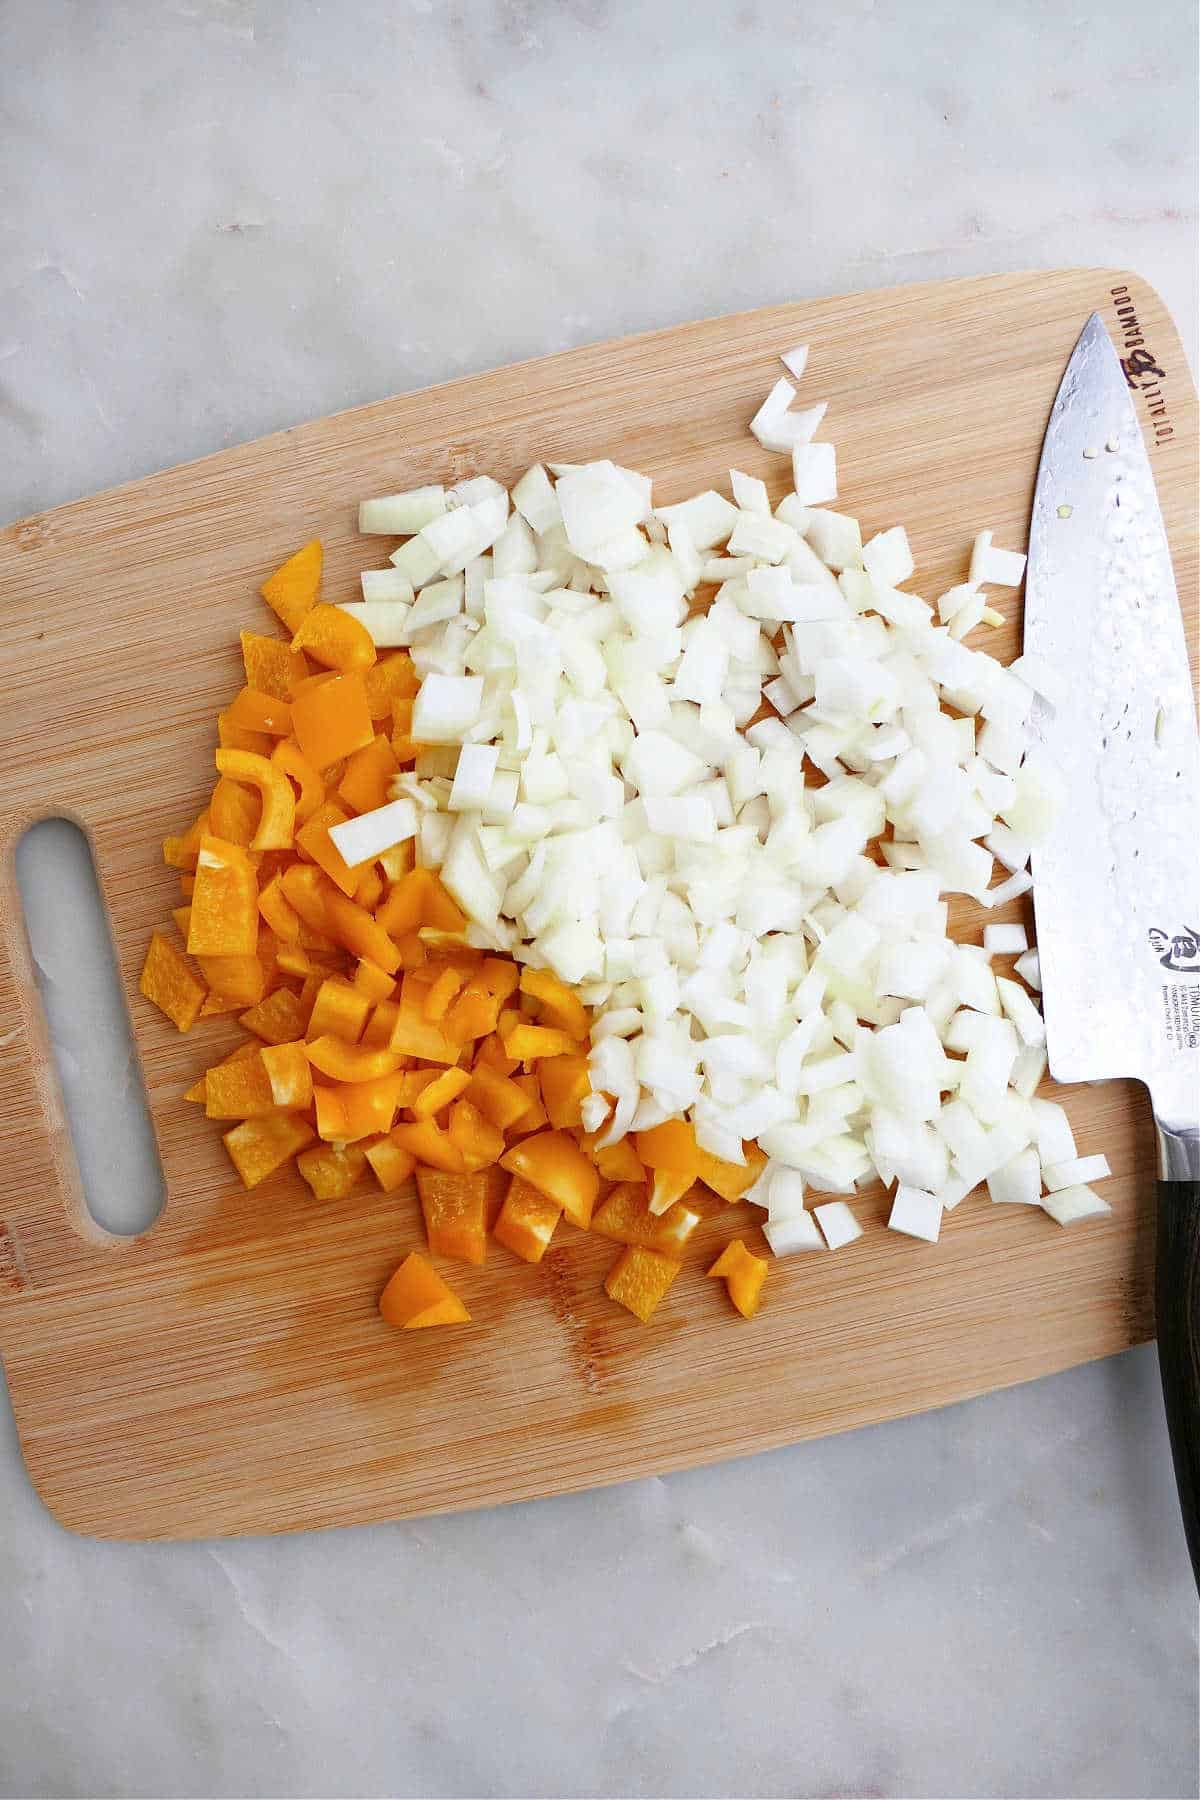 diced bell pepper and yellow onion on a bamboo cutting board with chef's knife